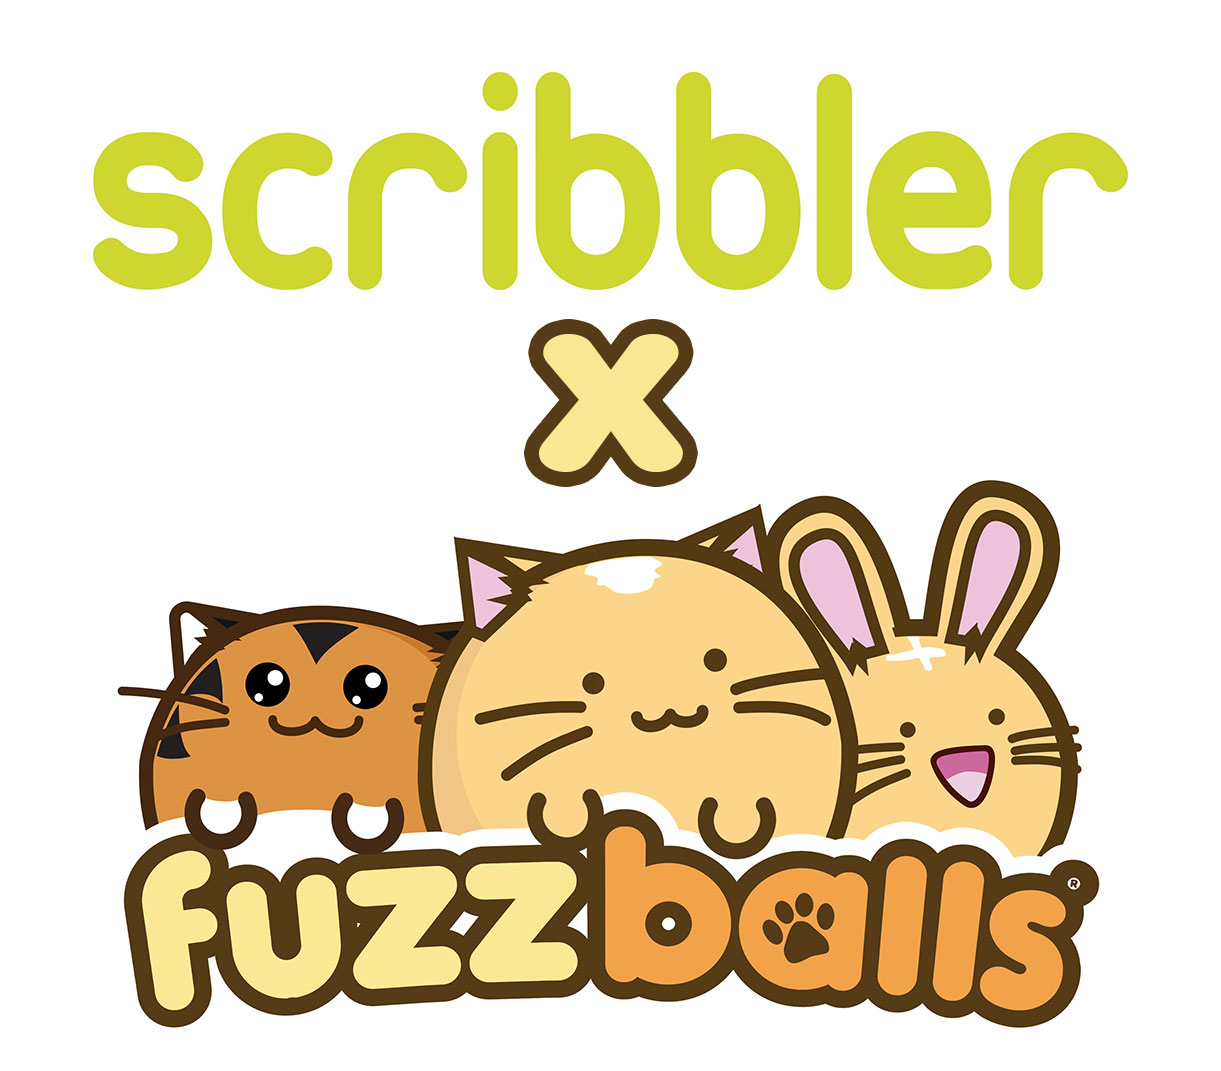 Fuzzballs Greeting Cards Now Available at Scribbler! image